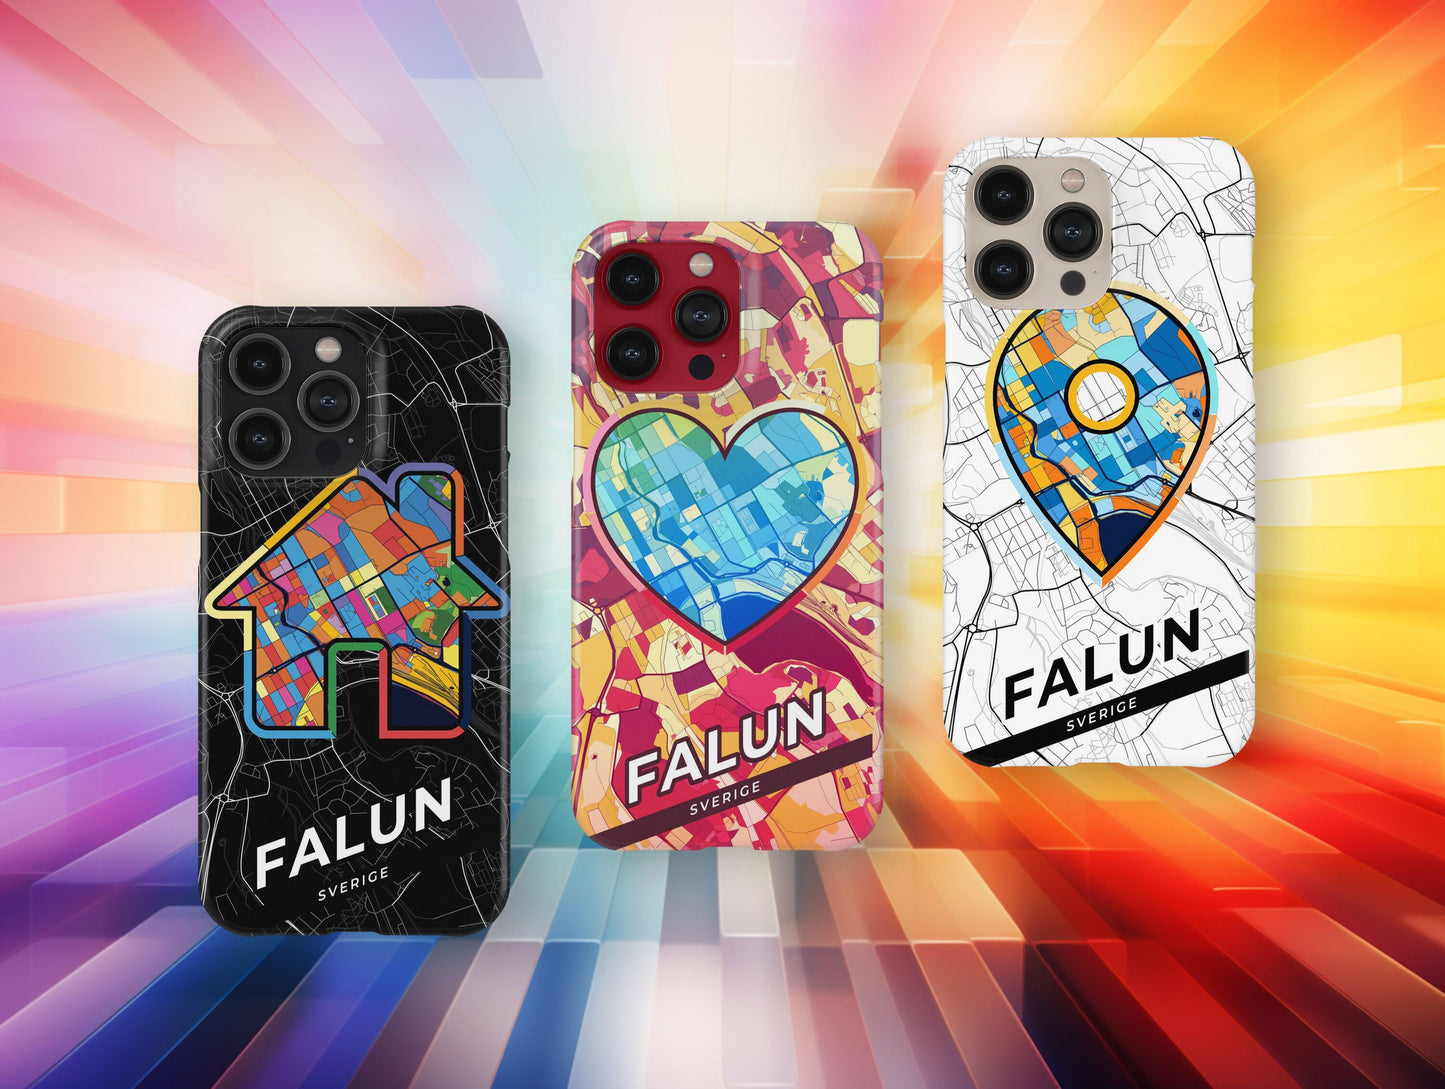 Falun Sweden slim phone case with colorful icon. Birthday, wedding or housewarming gift. Couple match cases.